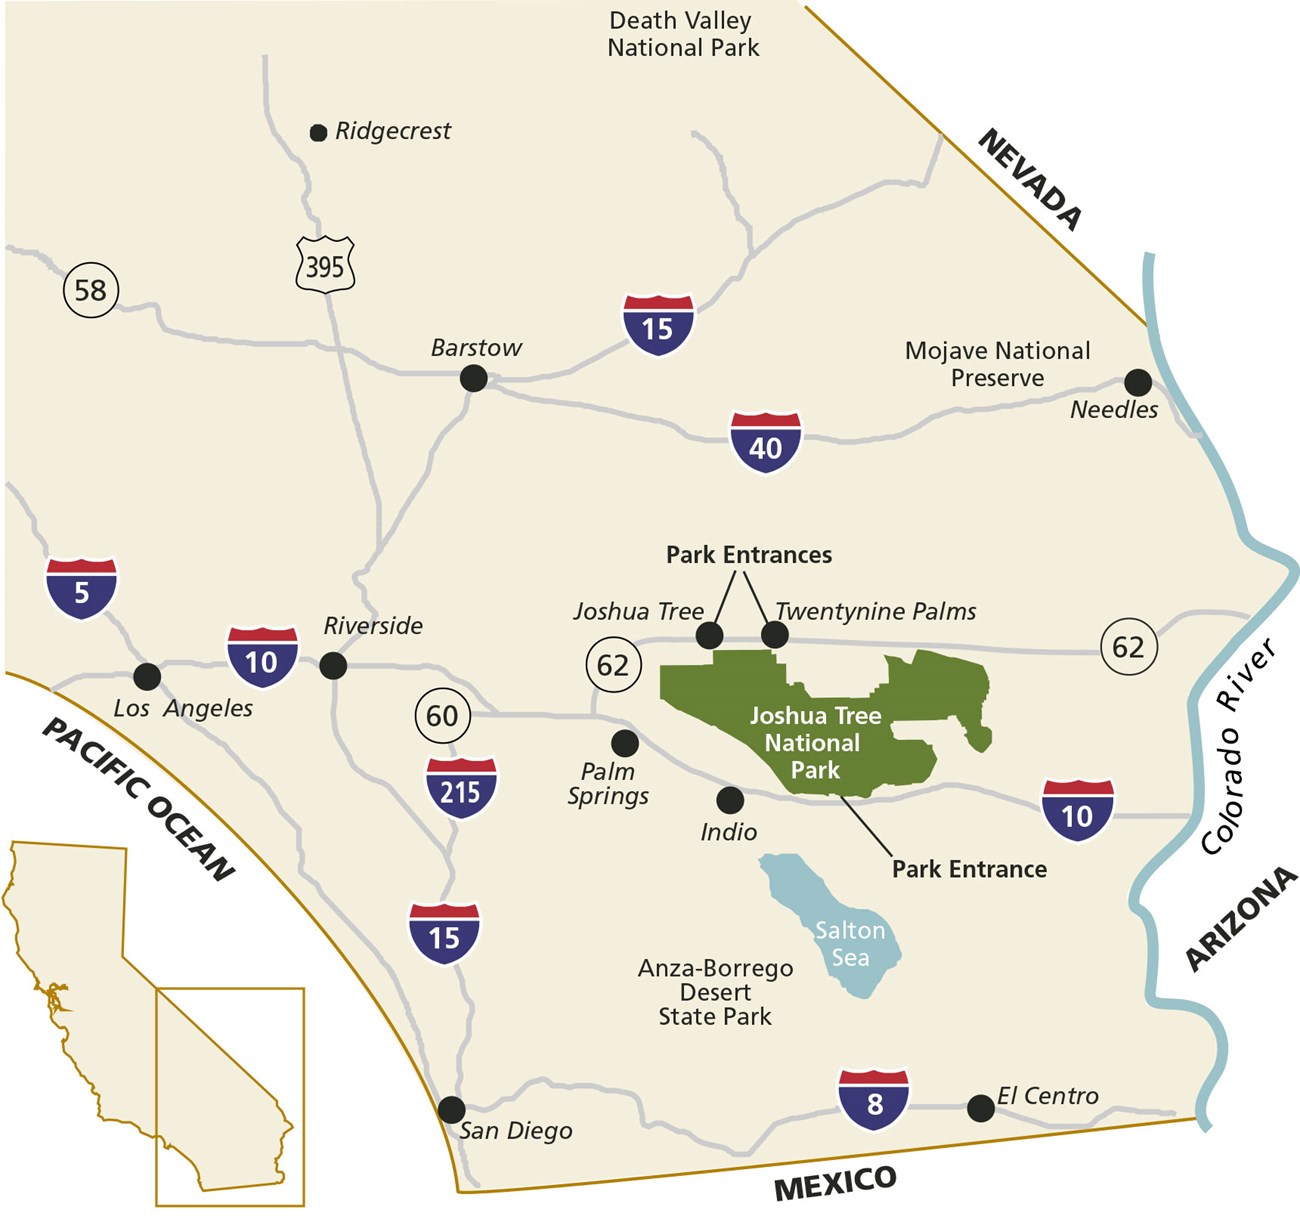 Color map of Joshua Tree National Park in location in Southern California. Major interstates are shown.